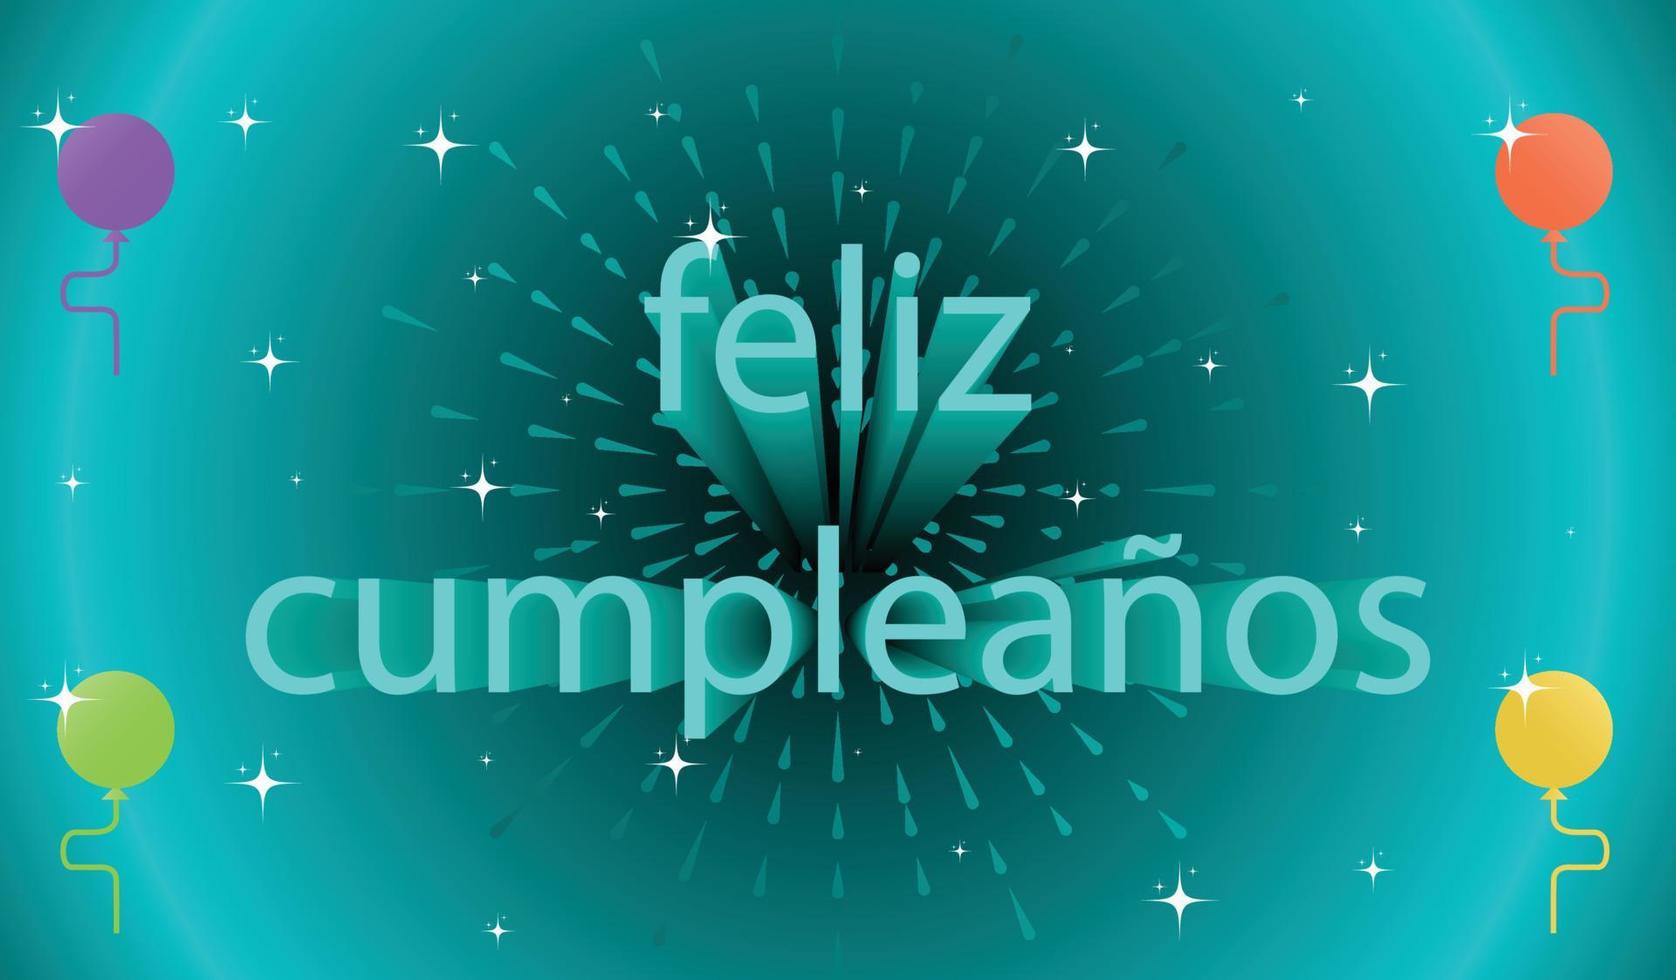 Happy birthday in spanish, feliz cumpleanos illustration with speedy text for greeting or invitation cards templates. vector